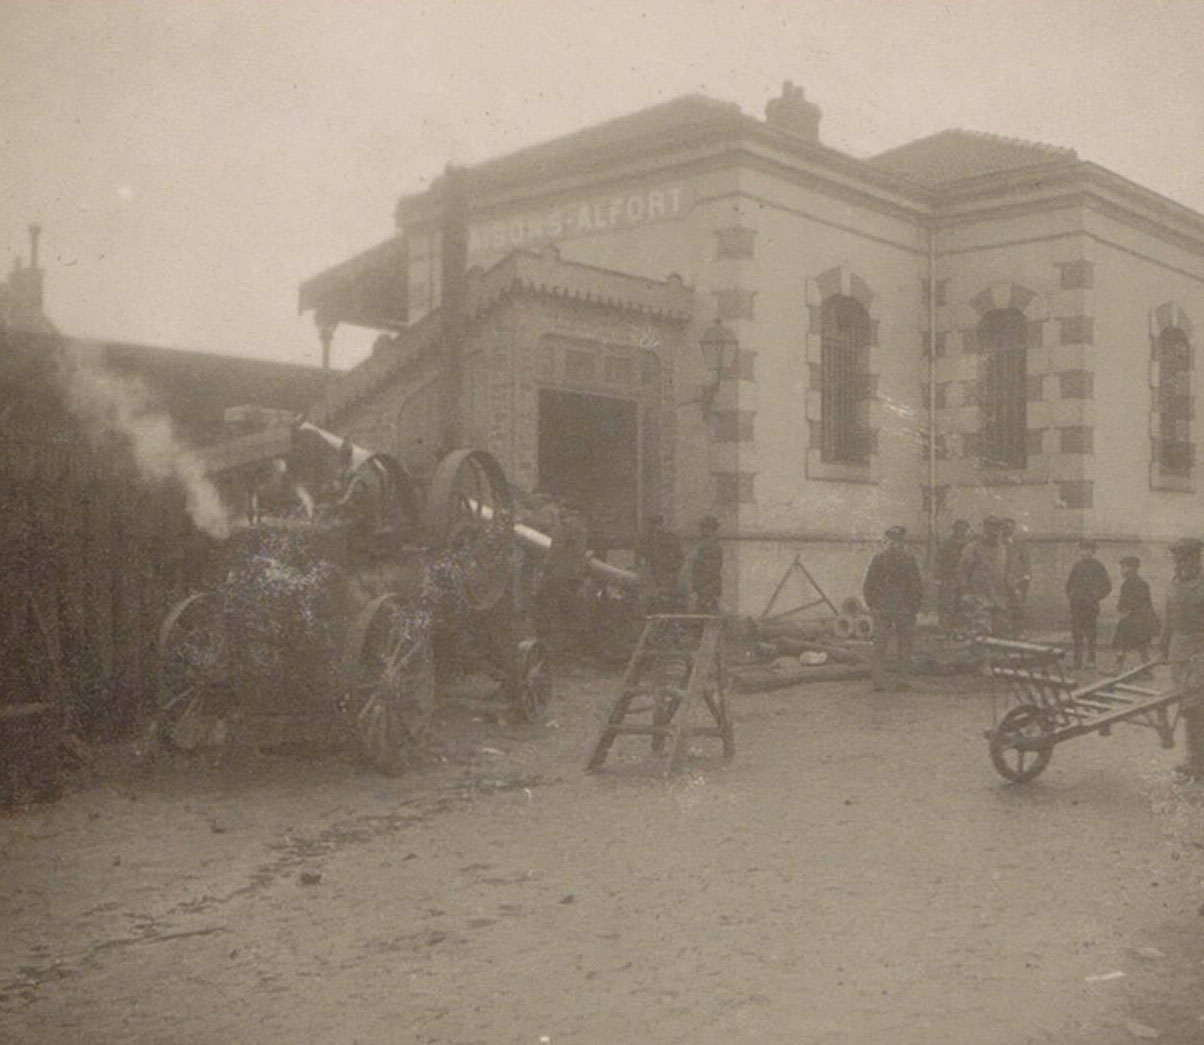 Men with wheelbarrows and a machine at Maisons-Alfort railway station during the Paris flood of 1910.